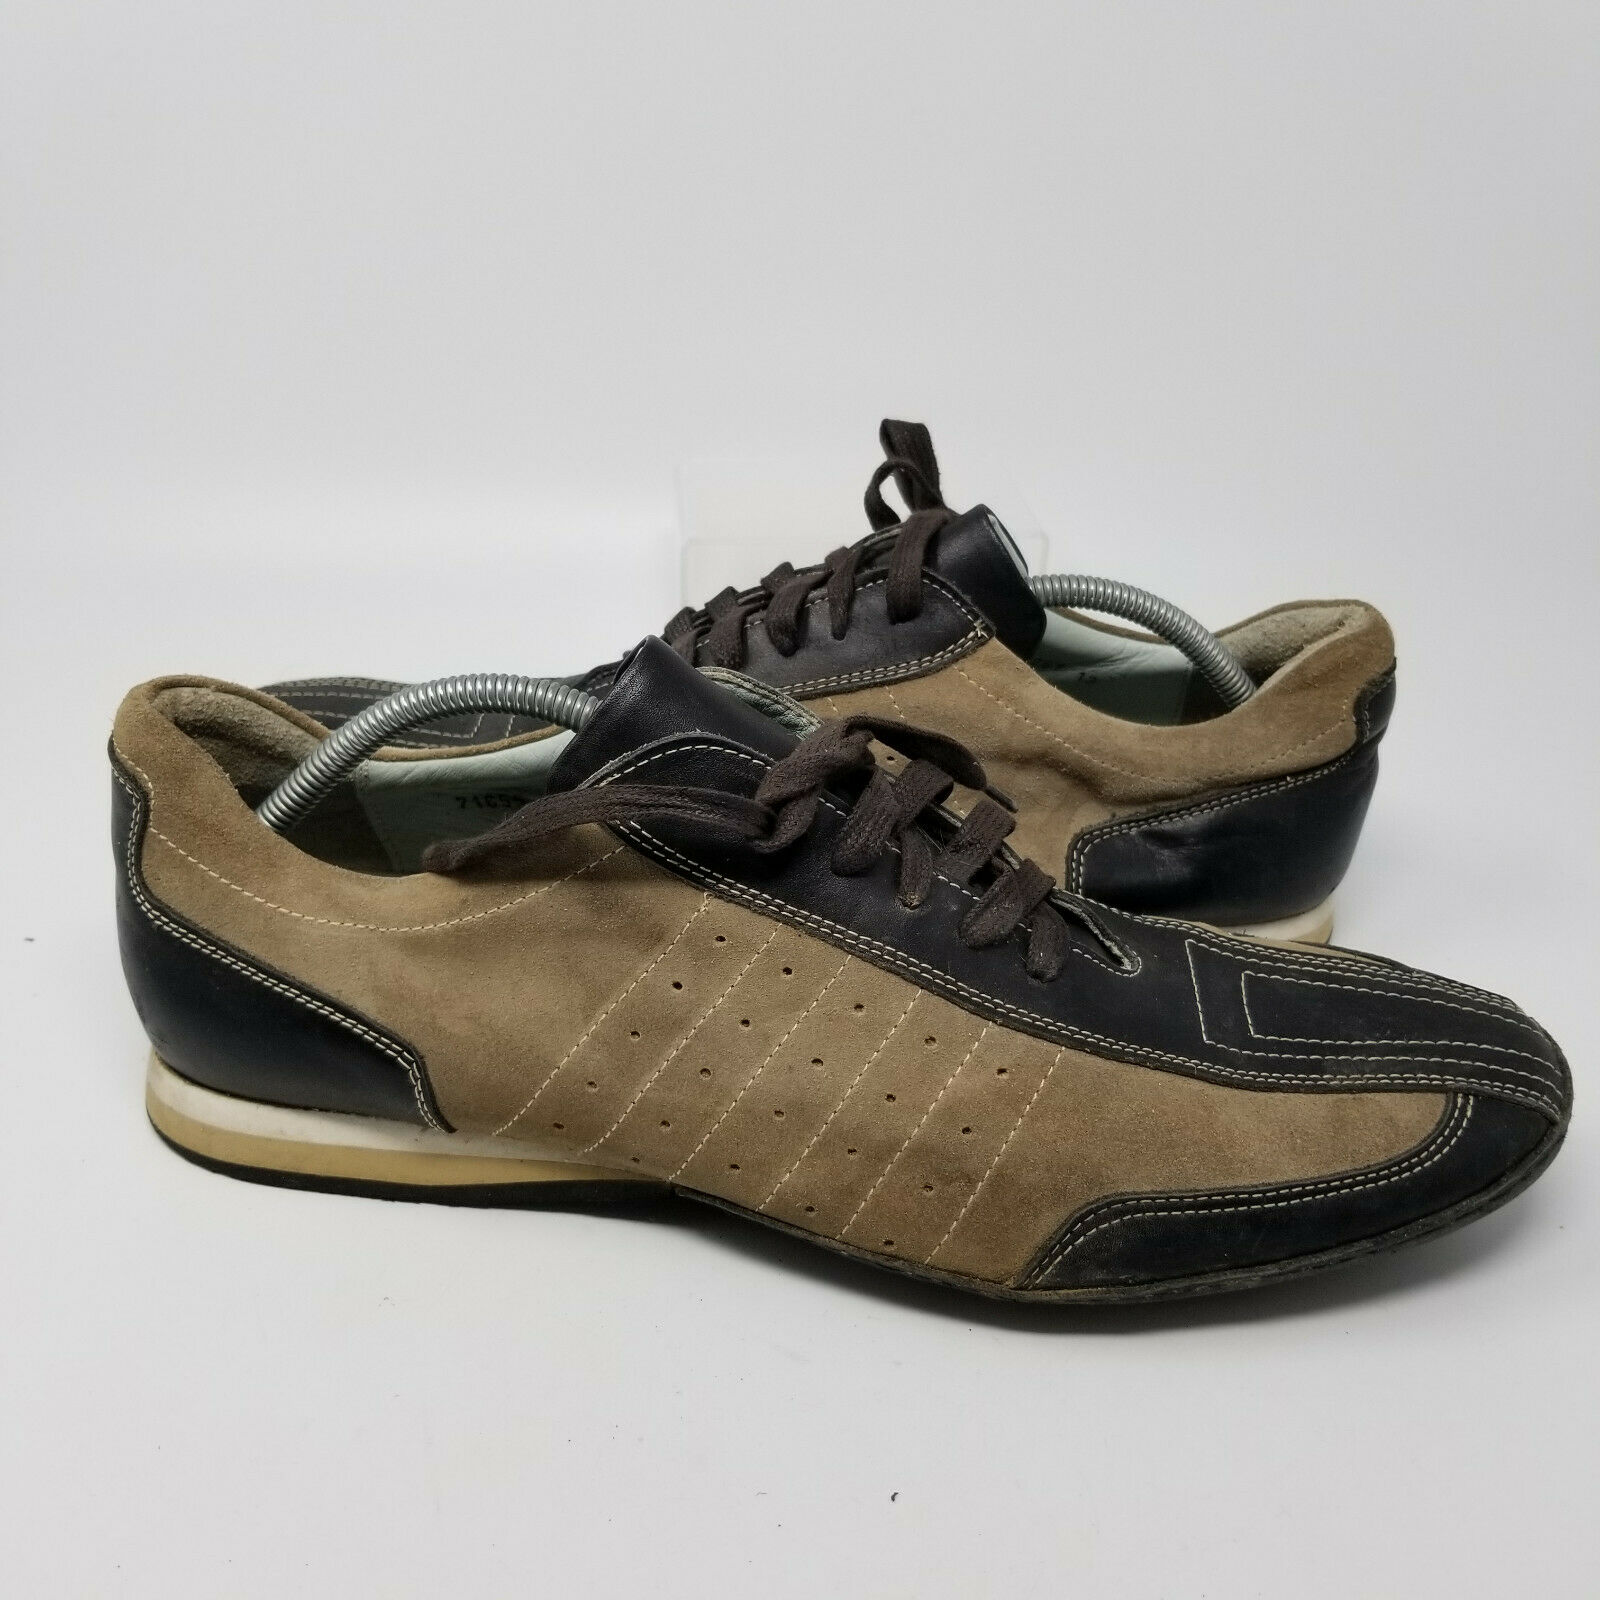 Kenneth Cole Made in Italy Brown Leather Walking Tennis Shoe Sneaker Men Size 13